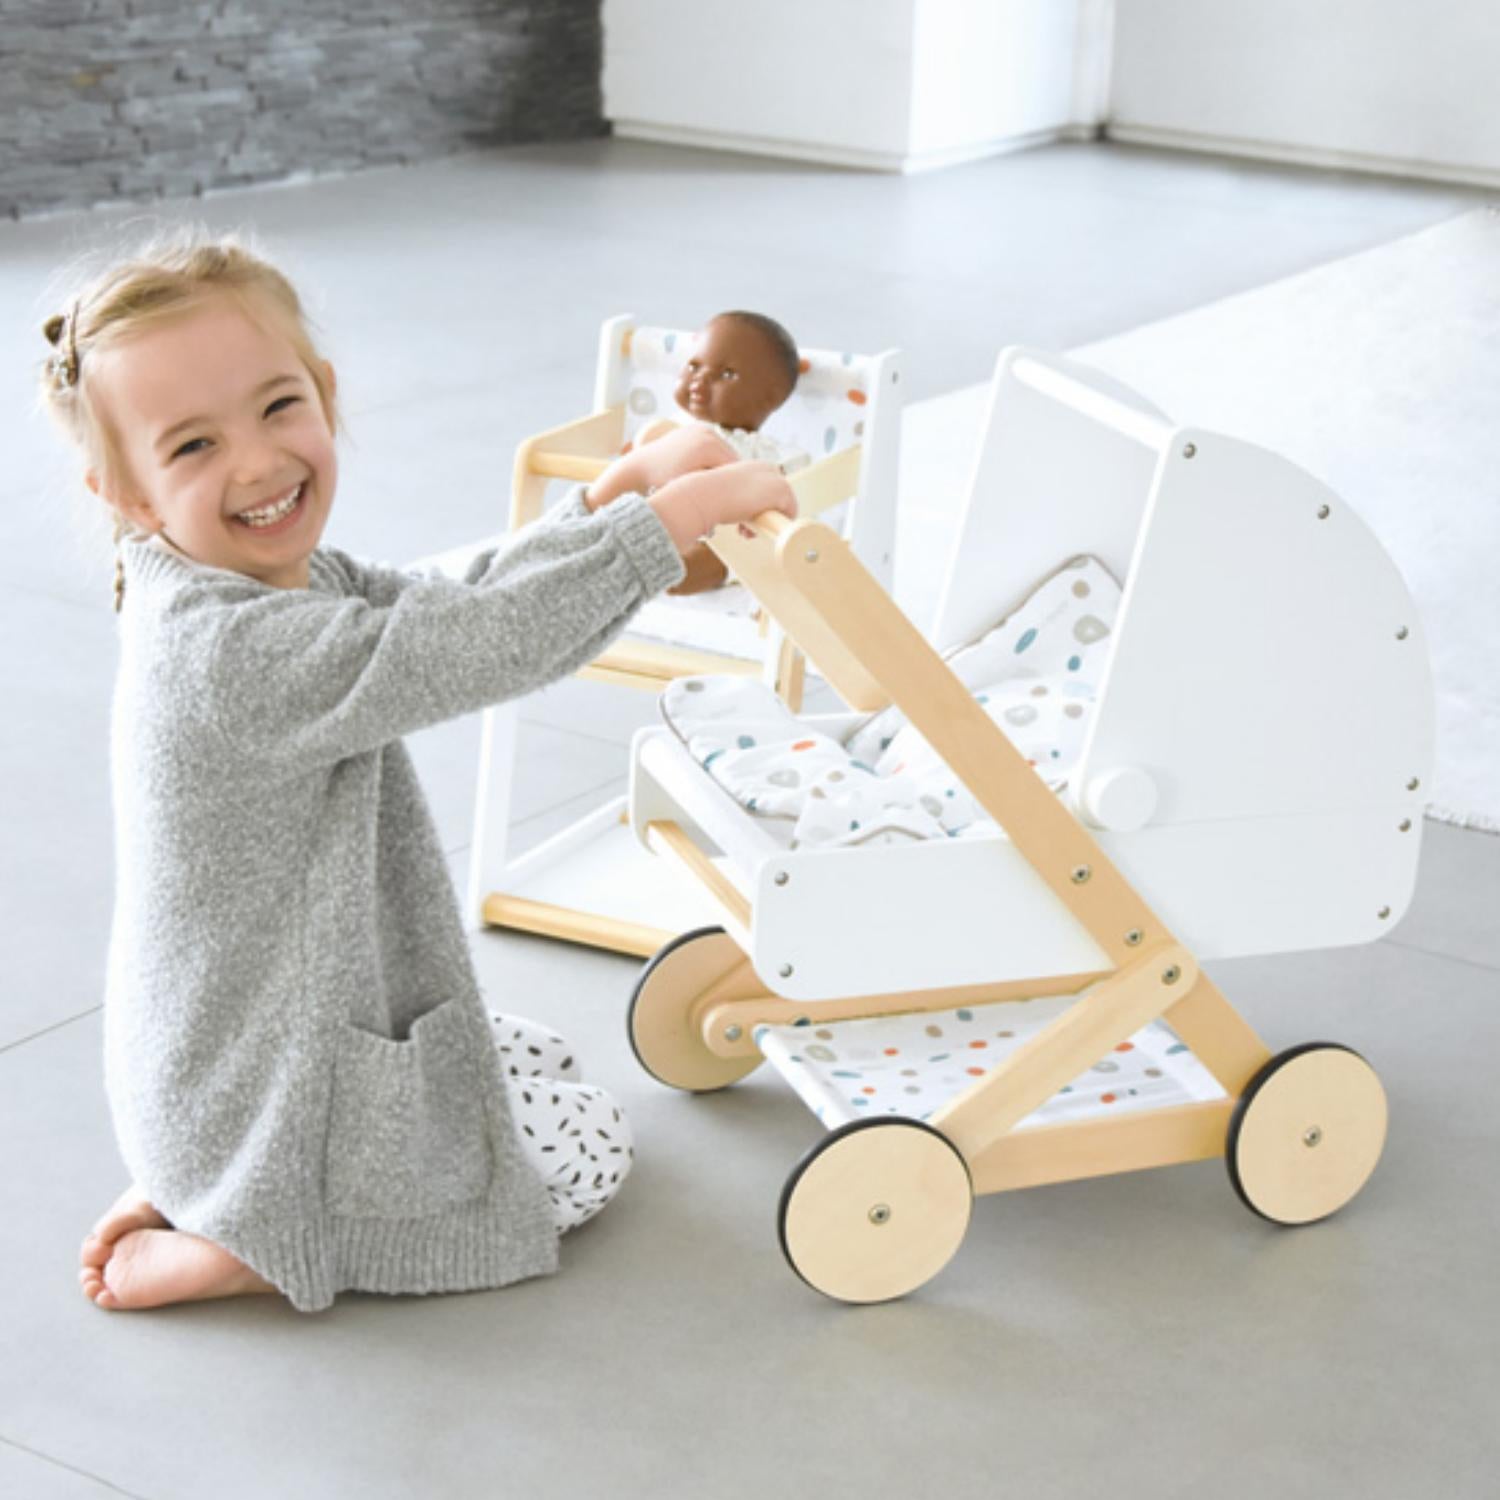 Small Foot Doll Pram | Wooden Pretend Play Toy for Kids | Lifestyle: Girl Playing with Doll Pram | BeoVERDE.ie